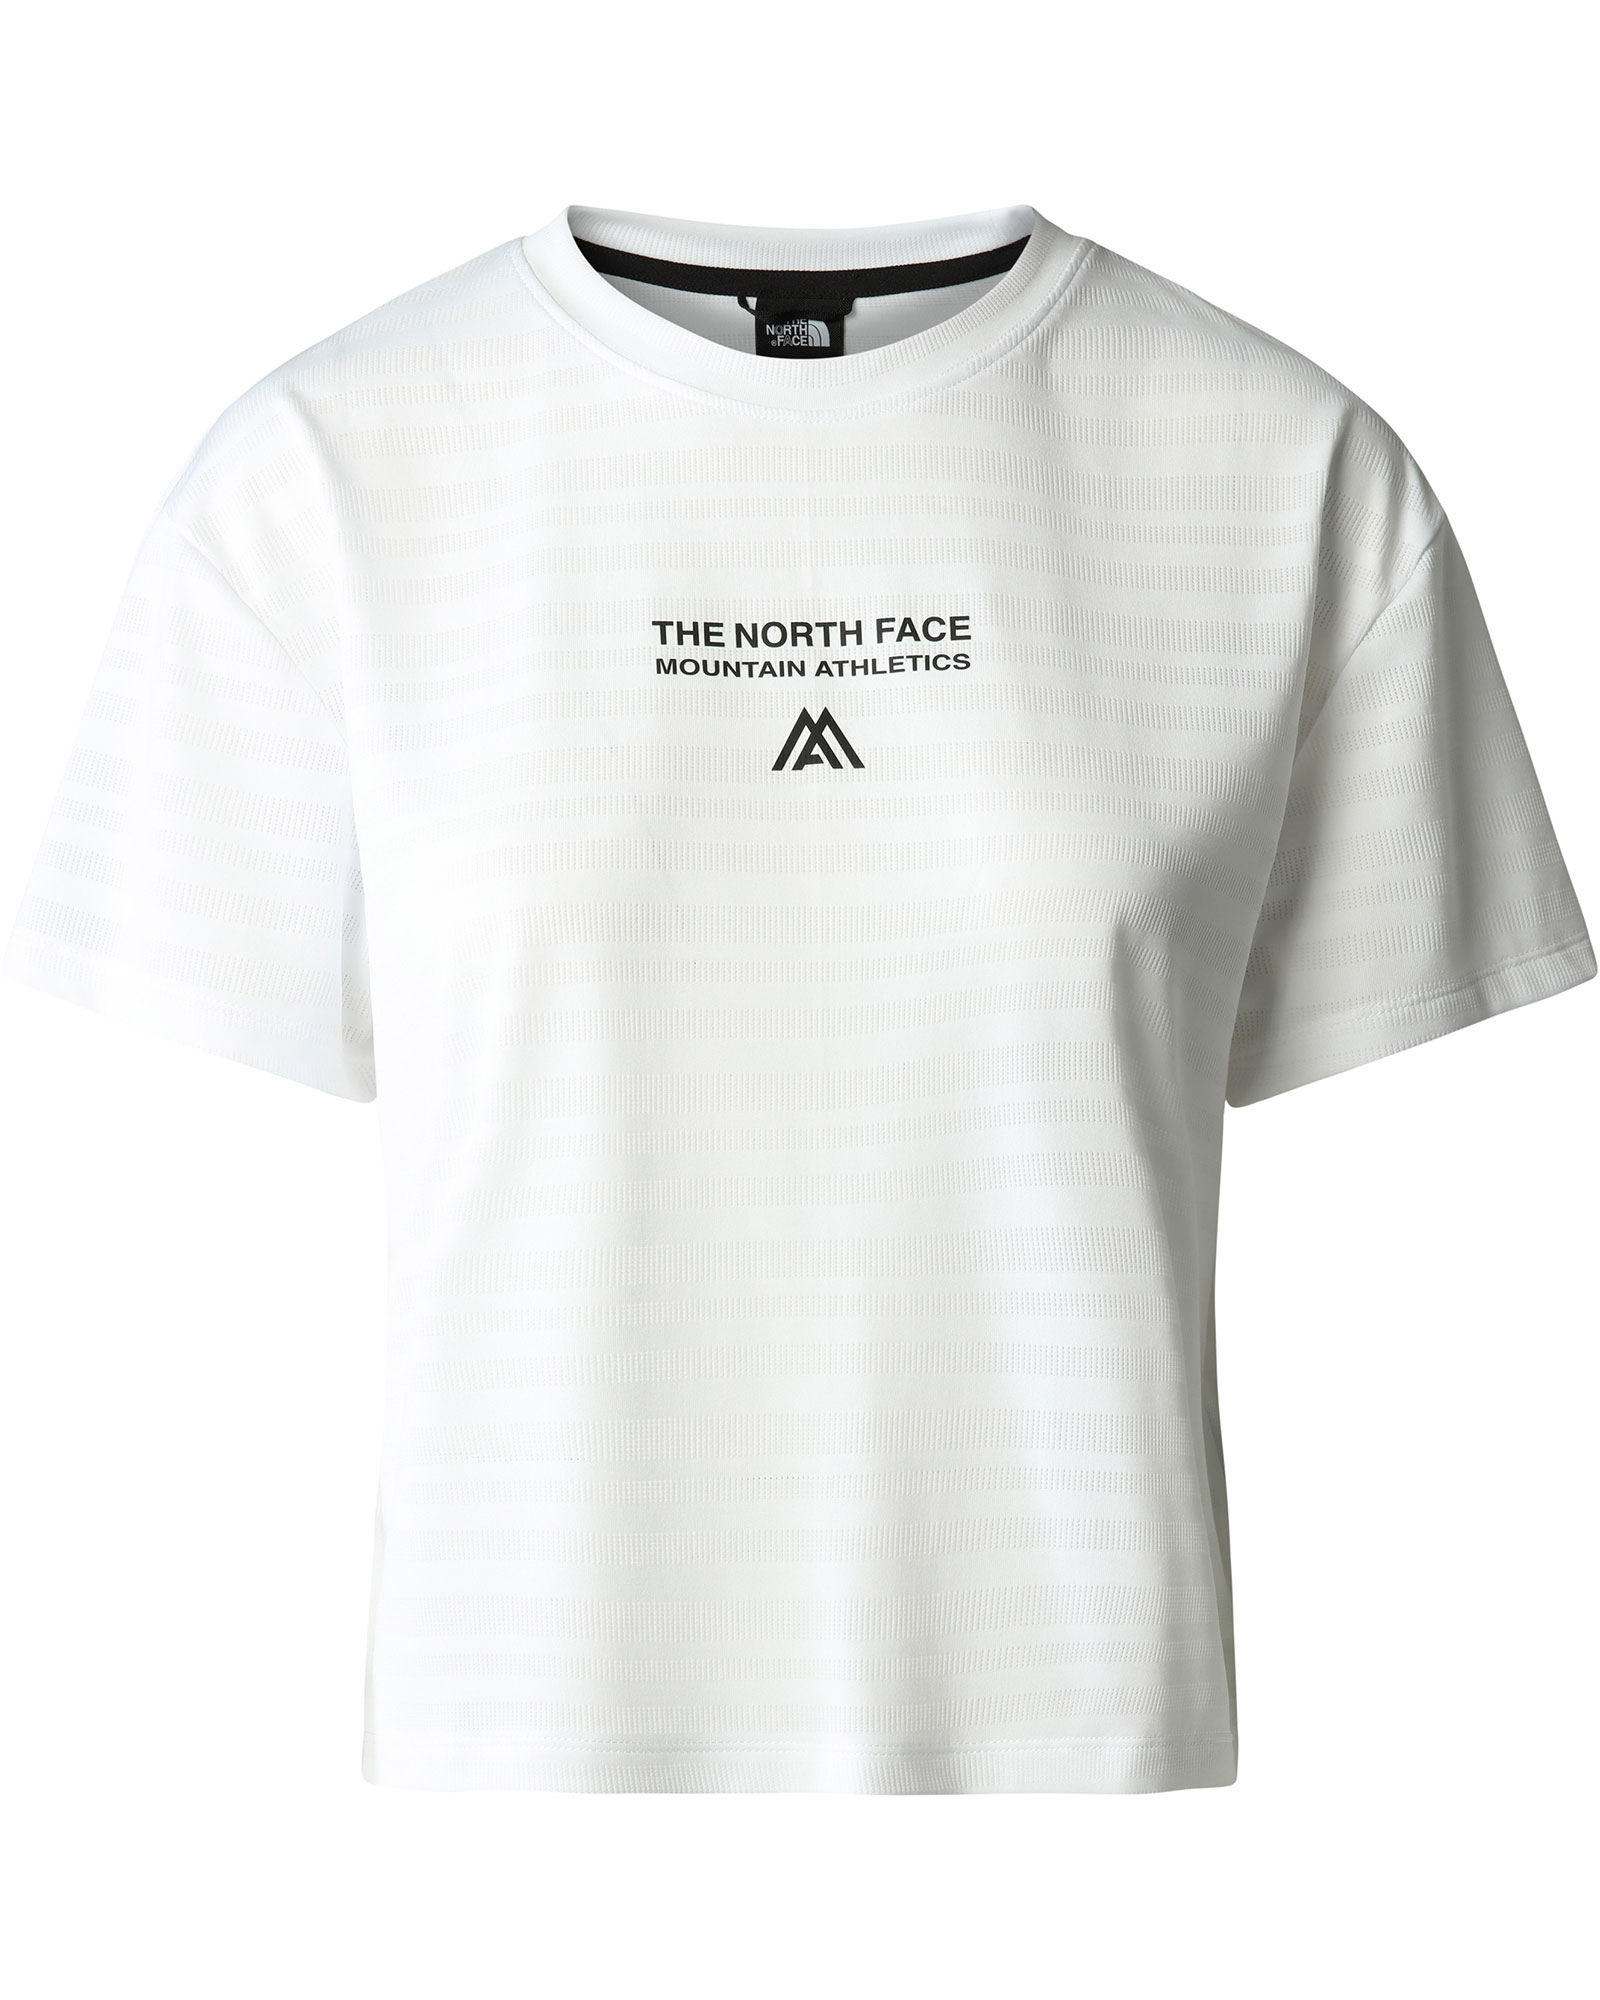 The North Face Women's MA S/S Tee 0